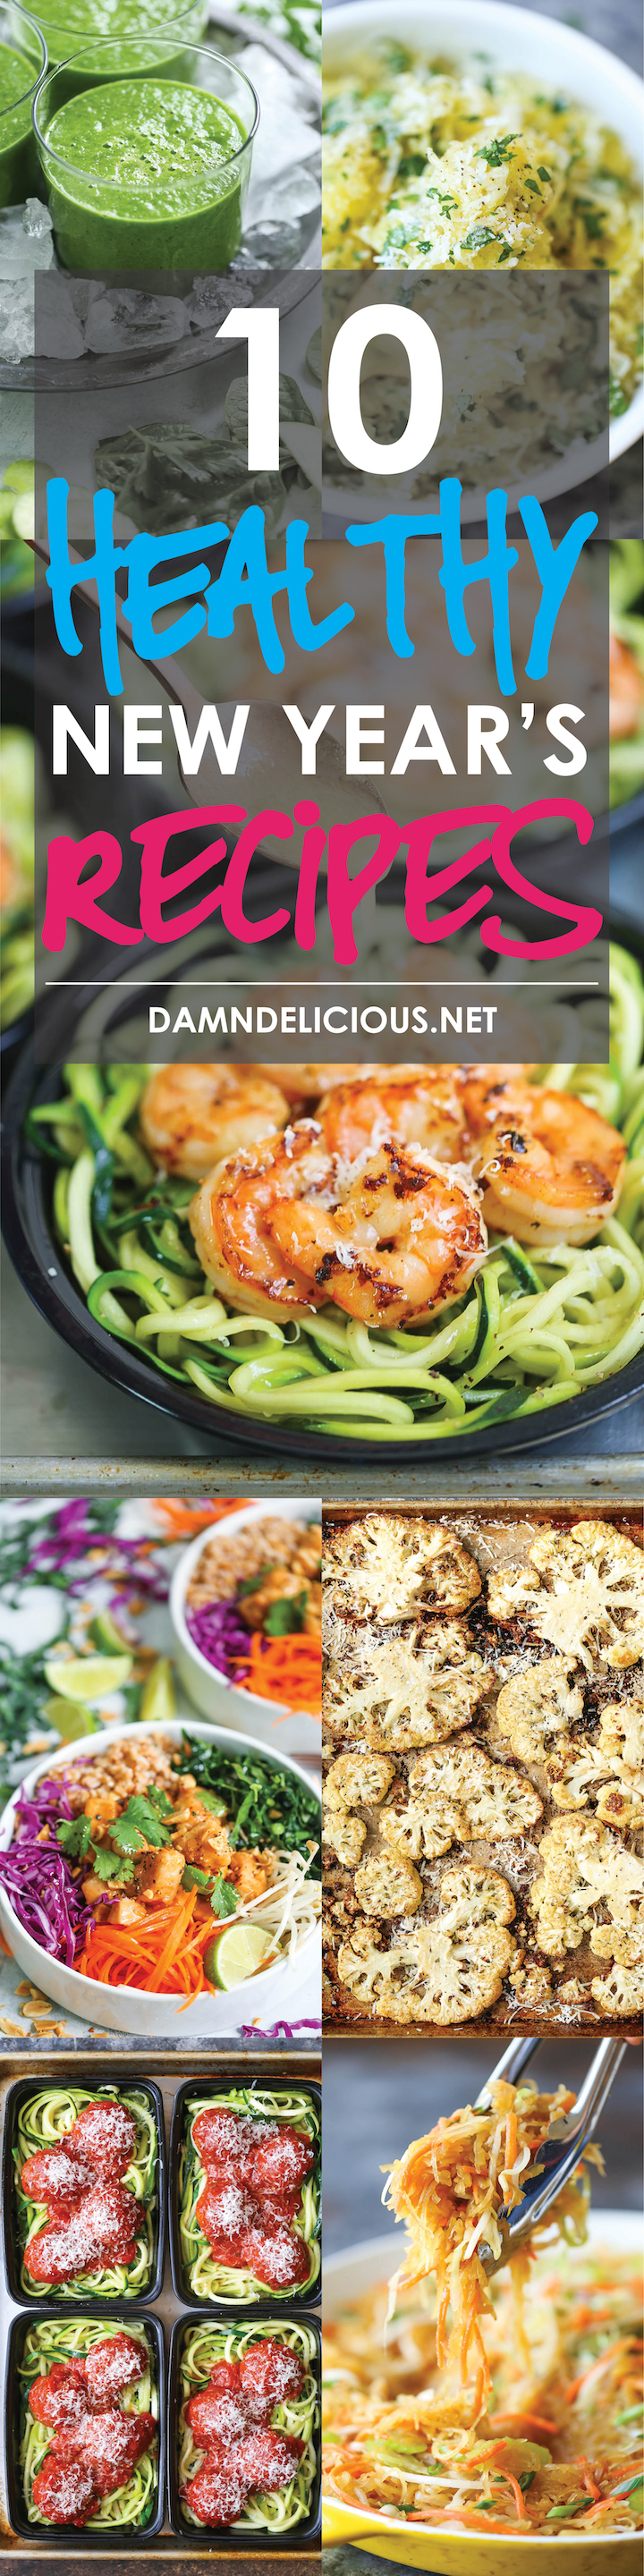 10 Healthy New Year's Recipes - New Year, New You! Stick to those resolutions with these simple, quick and easy, hearty, healthy recipes! From meal prep recipes for the week to 30 min dinners! No excuses. These recipes are just TOO EASY!